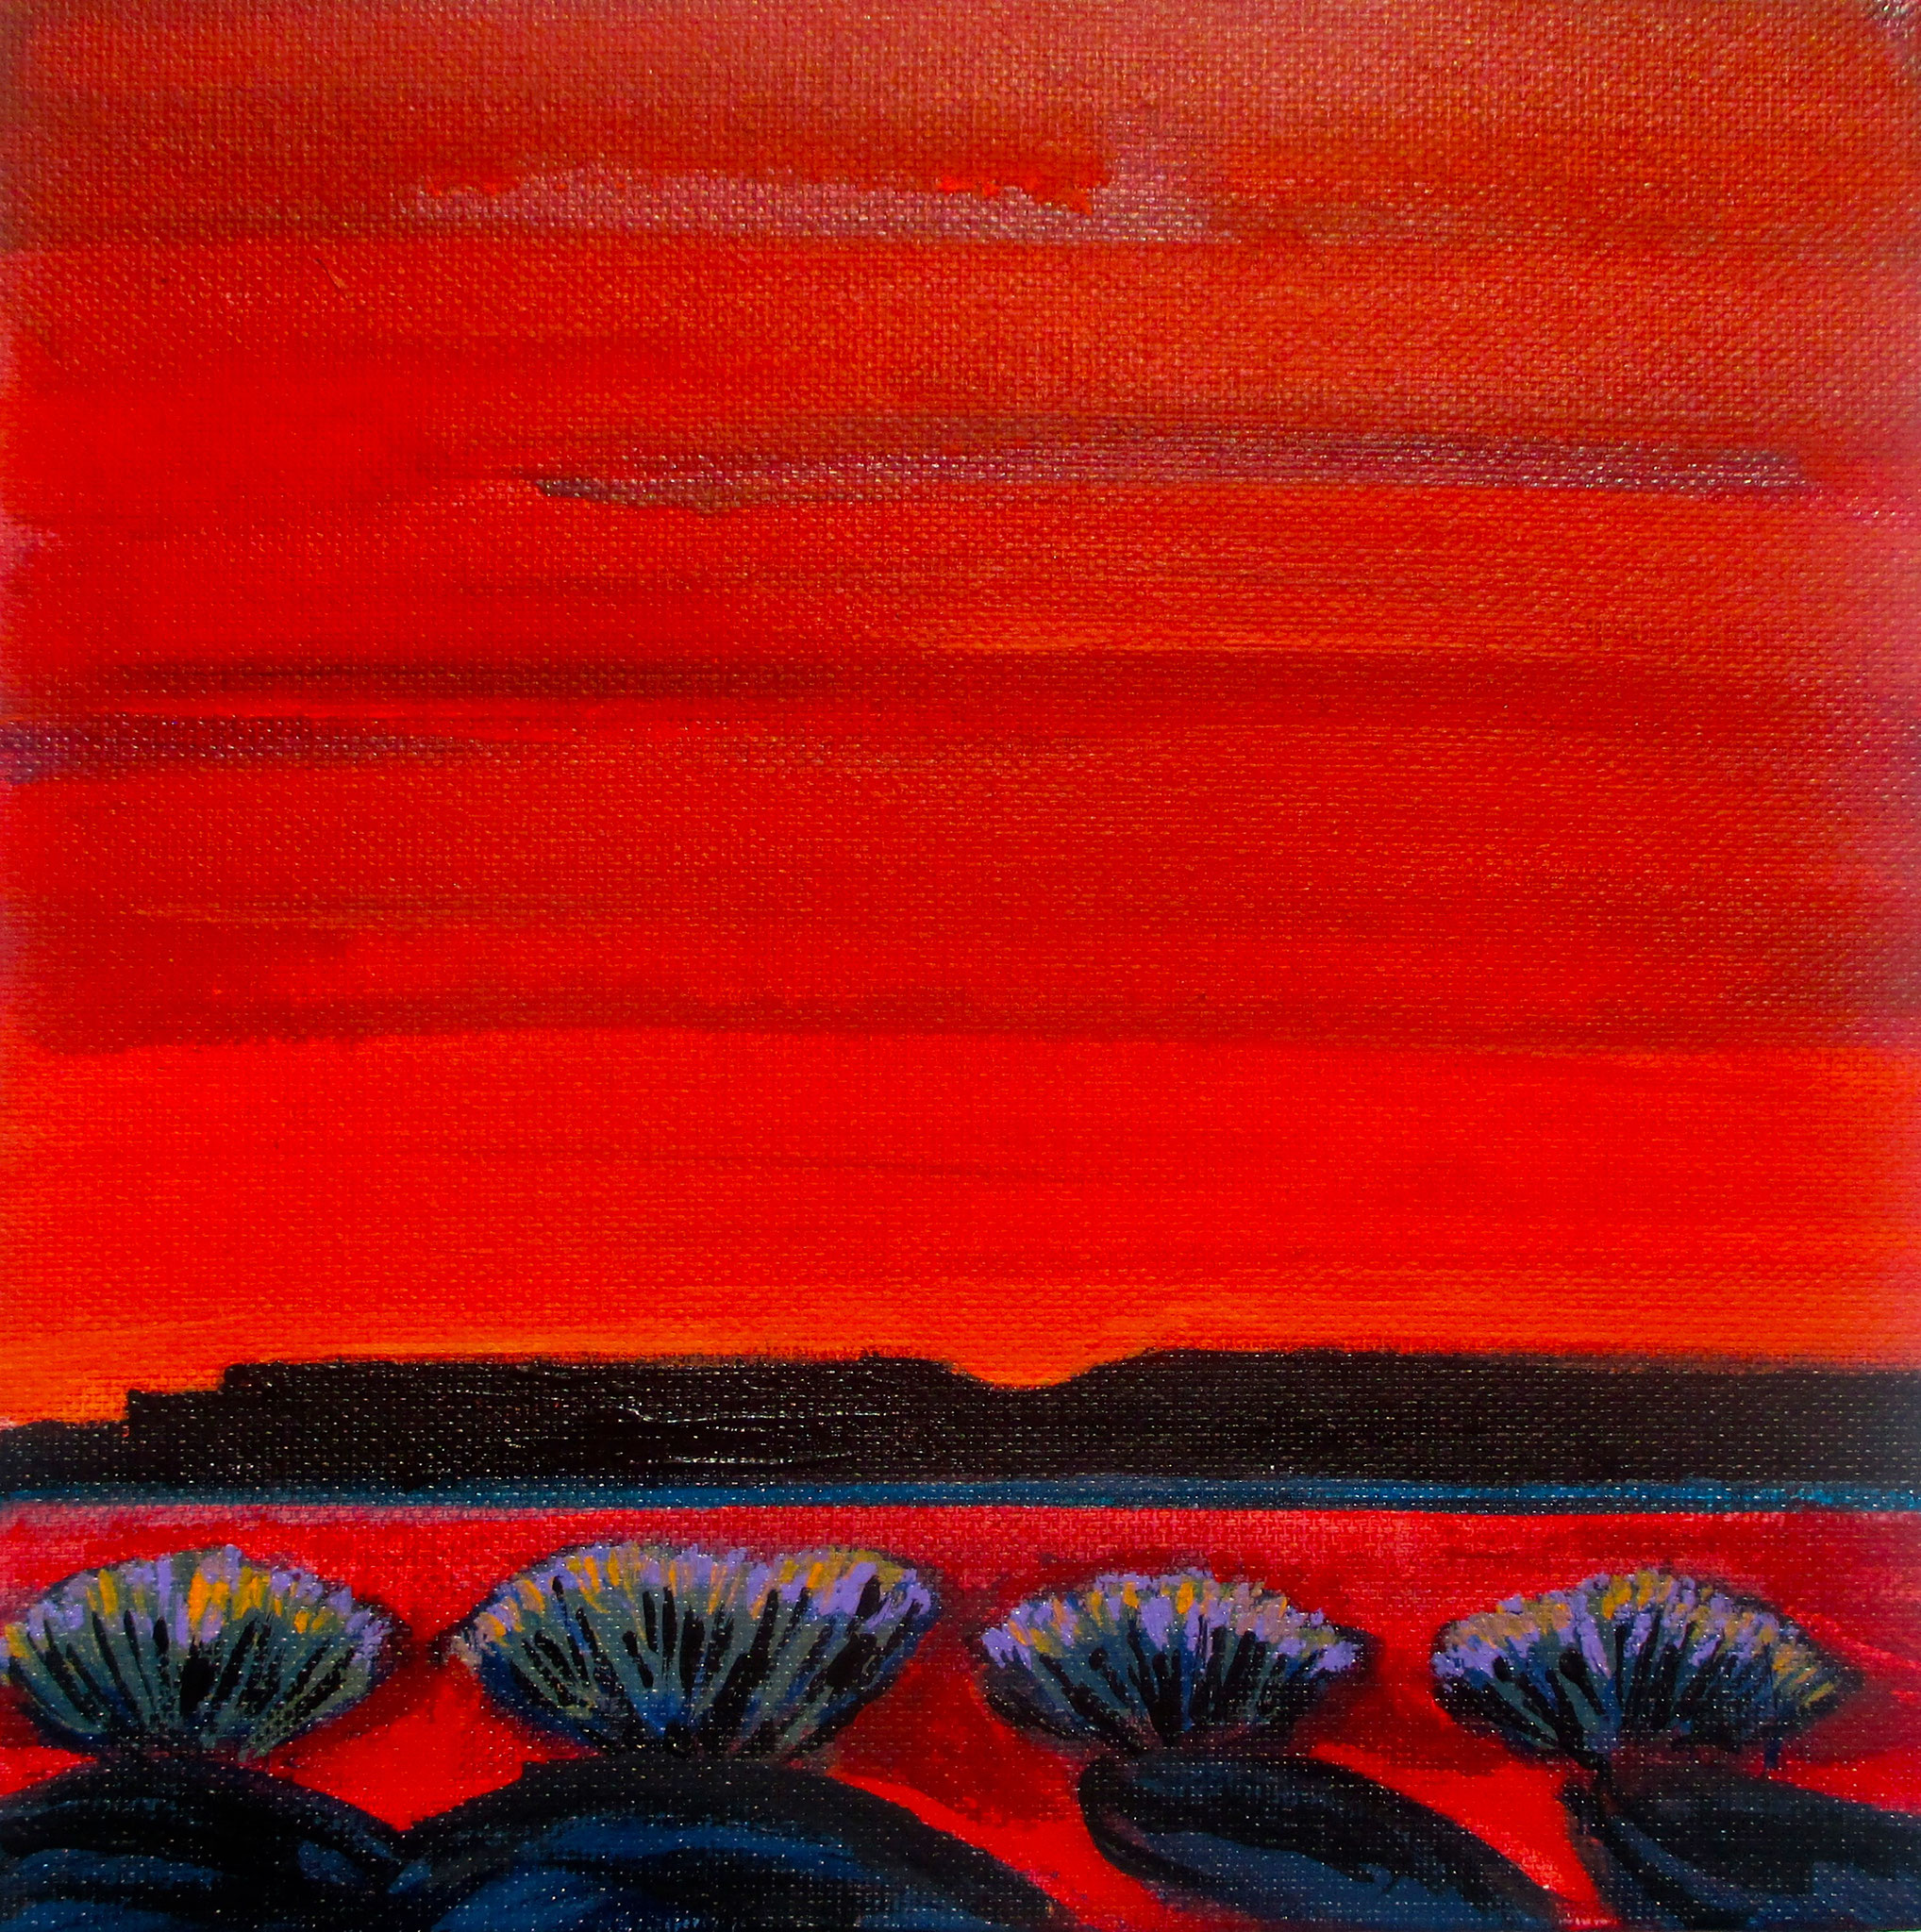 Red Sunset, acrylic on canvas, 12 x 12, 2019 SOLD